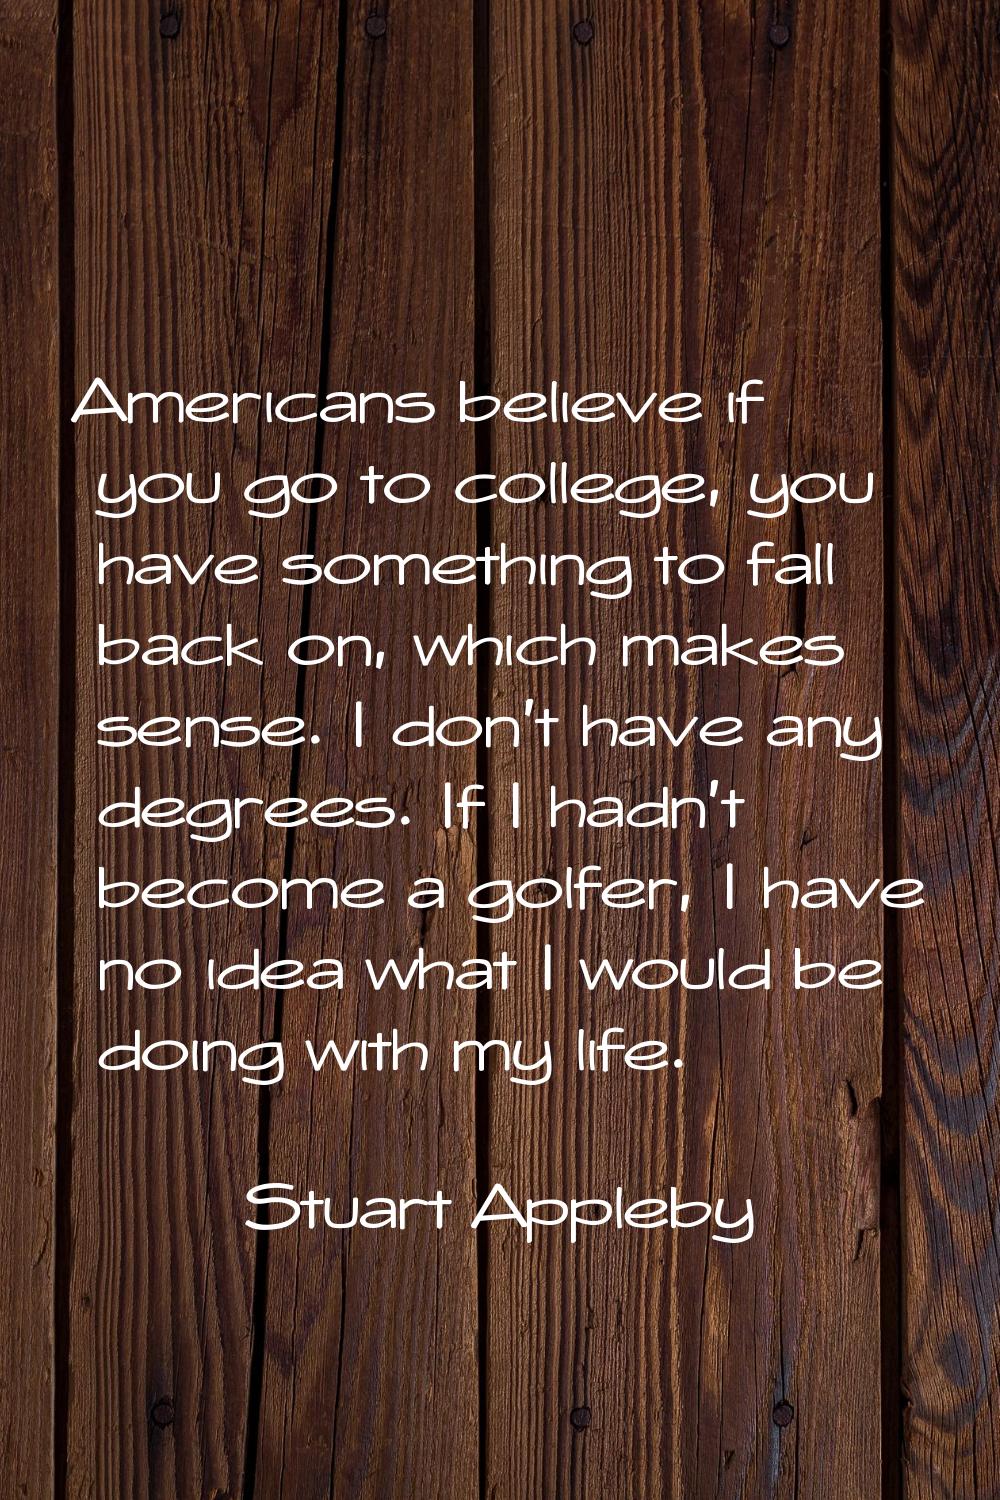 Americans believe if you go to college, you have something to fall back on, which makes sense. I do